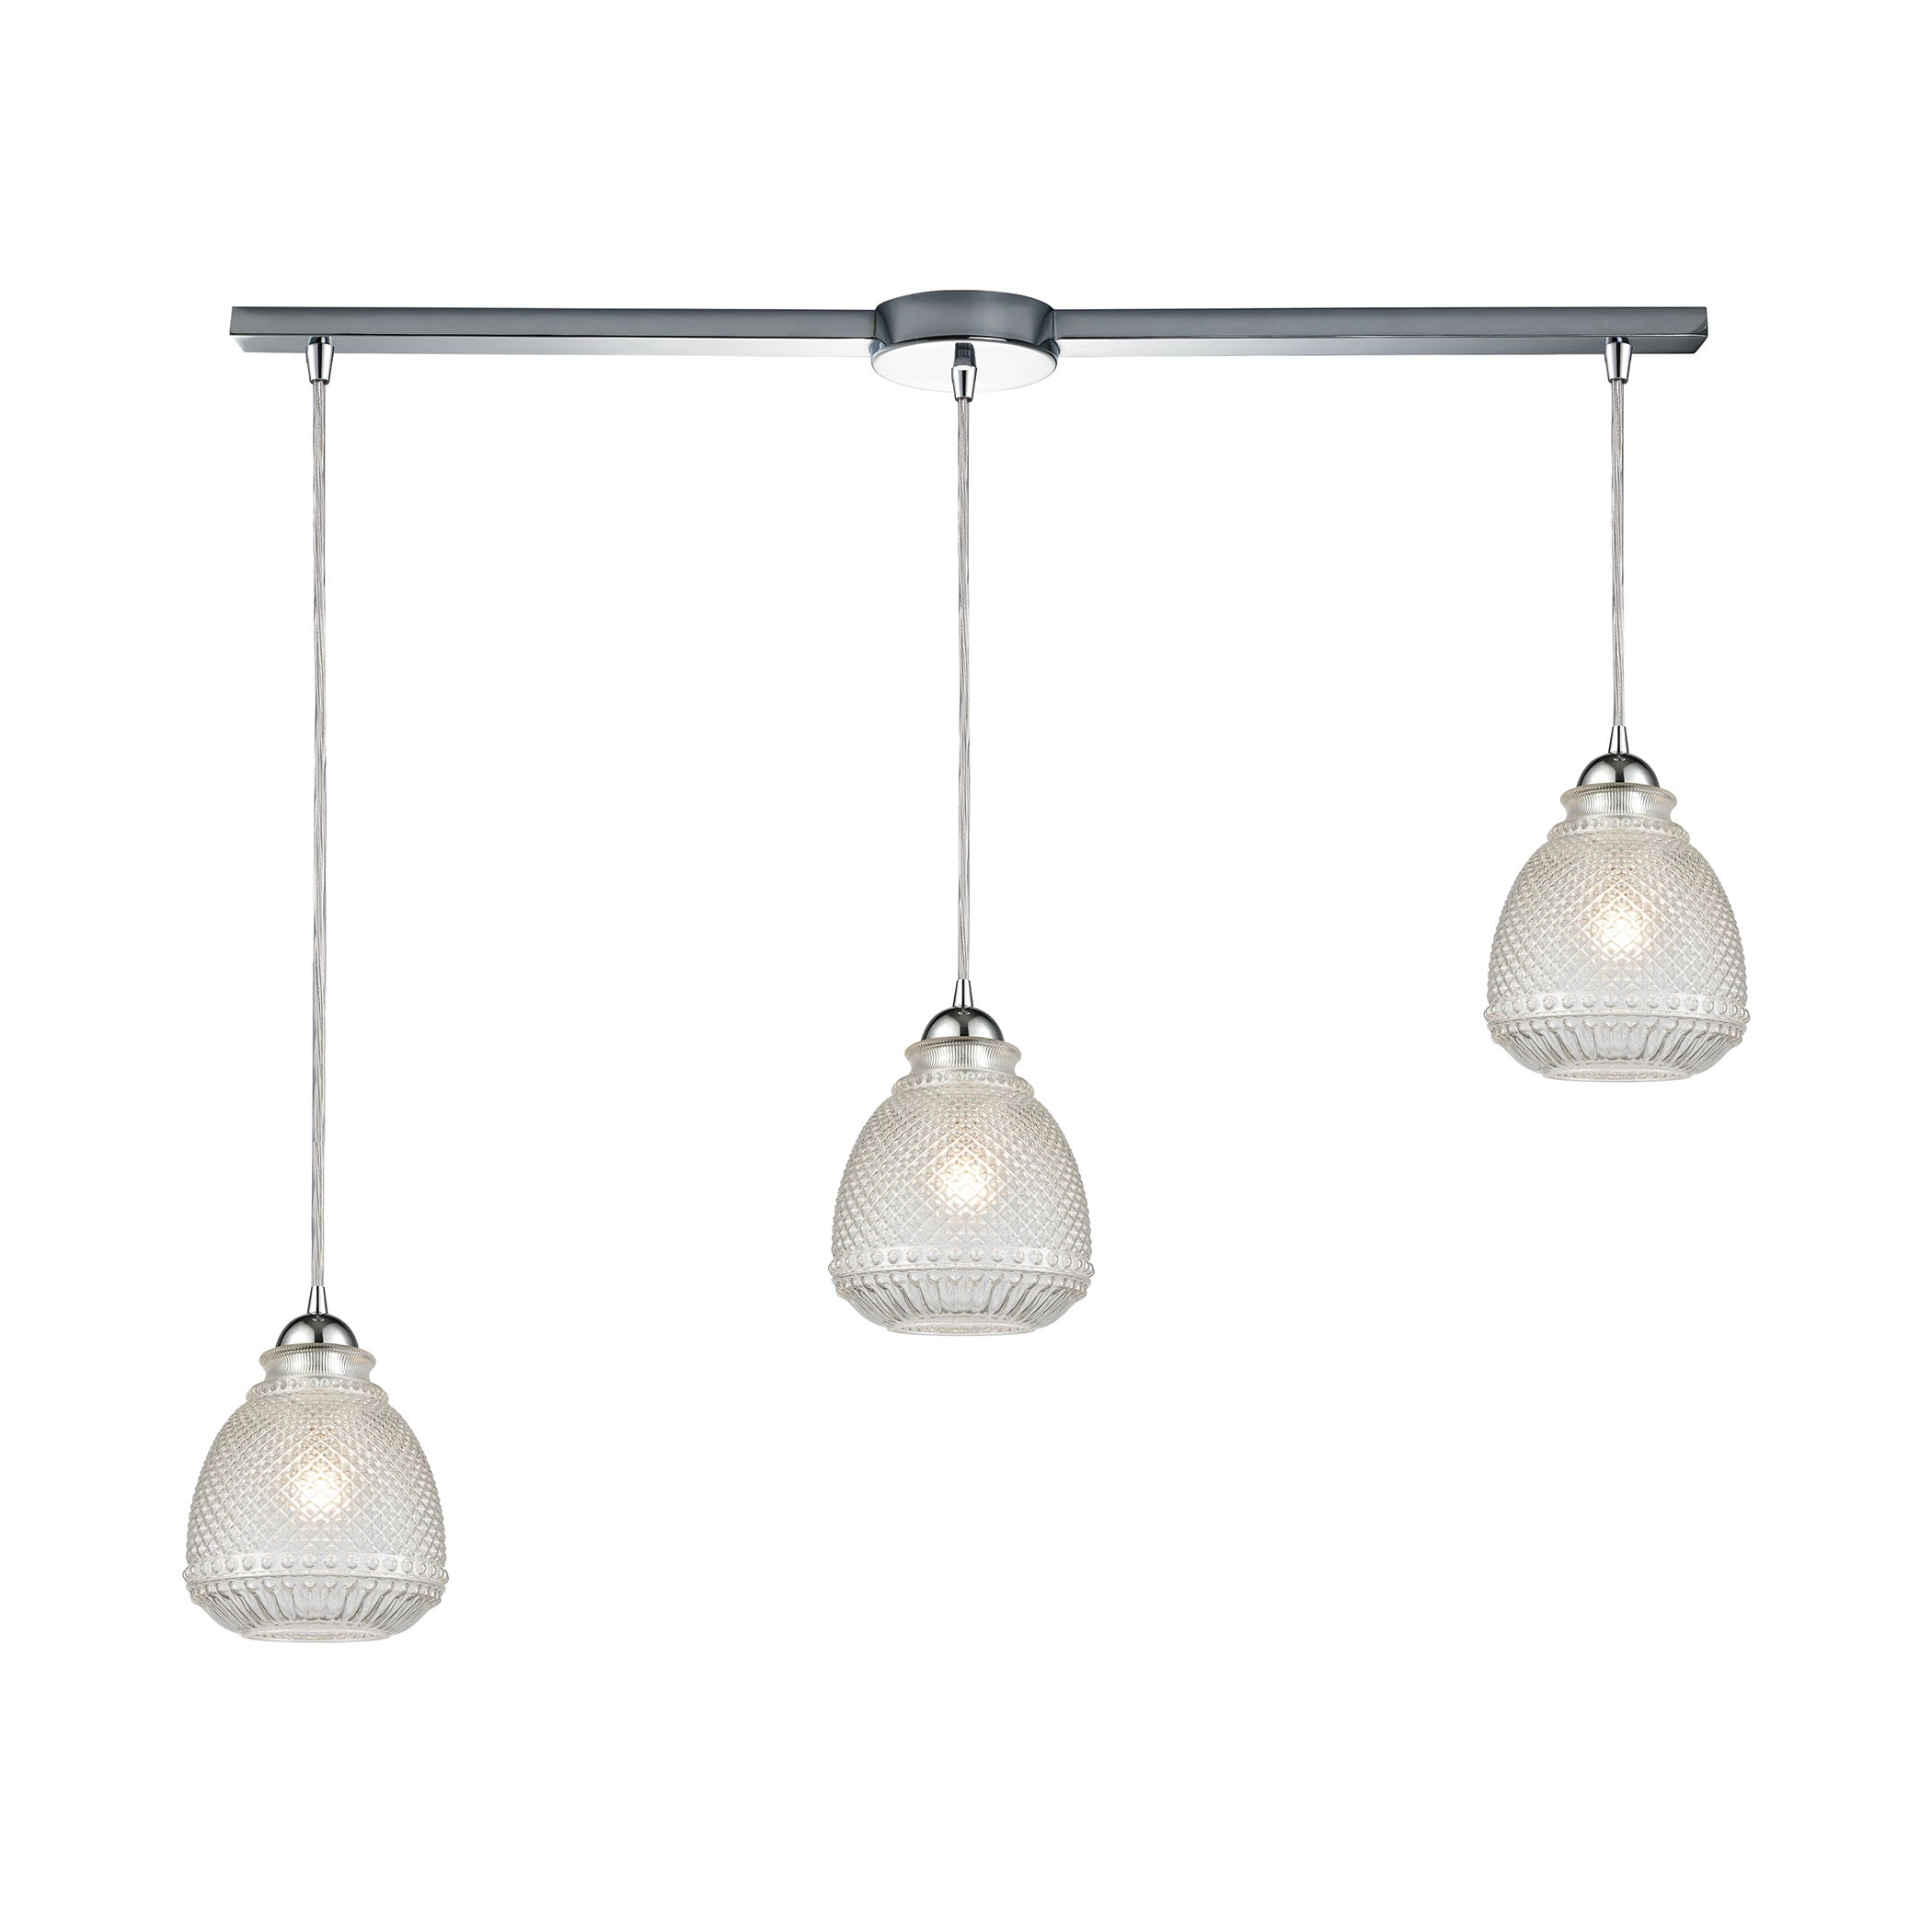 ELK Lighting 56590/3L Victoriana 3-Light Linear Mini Pendant Fixture in Polished Chrome with Clear Crosshatched Glass